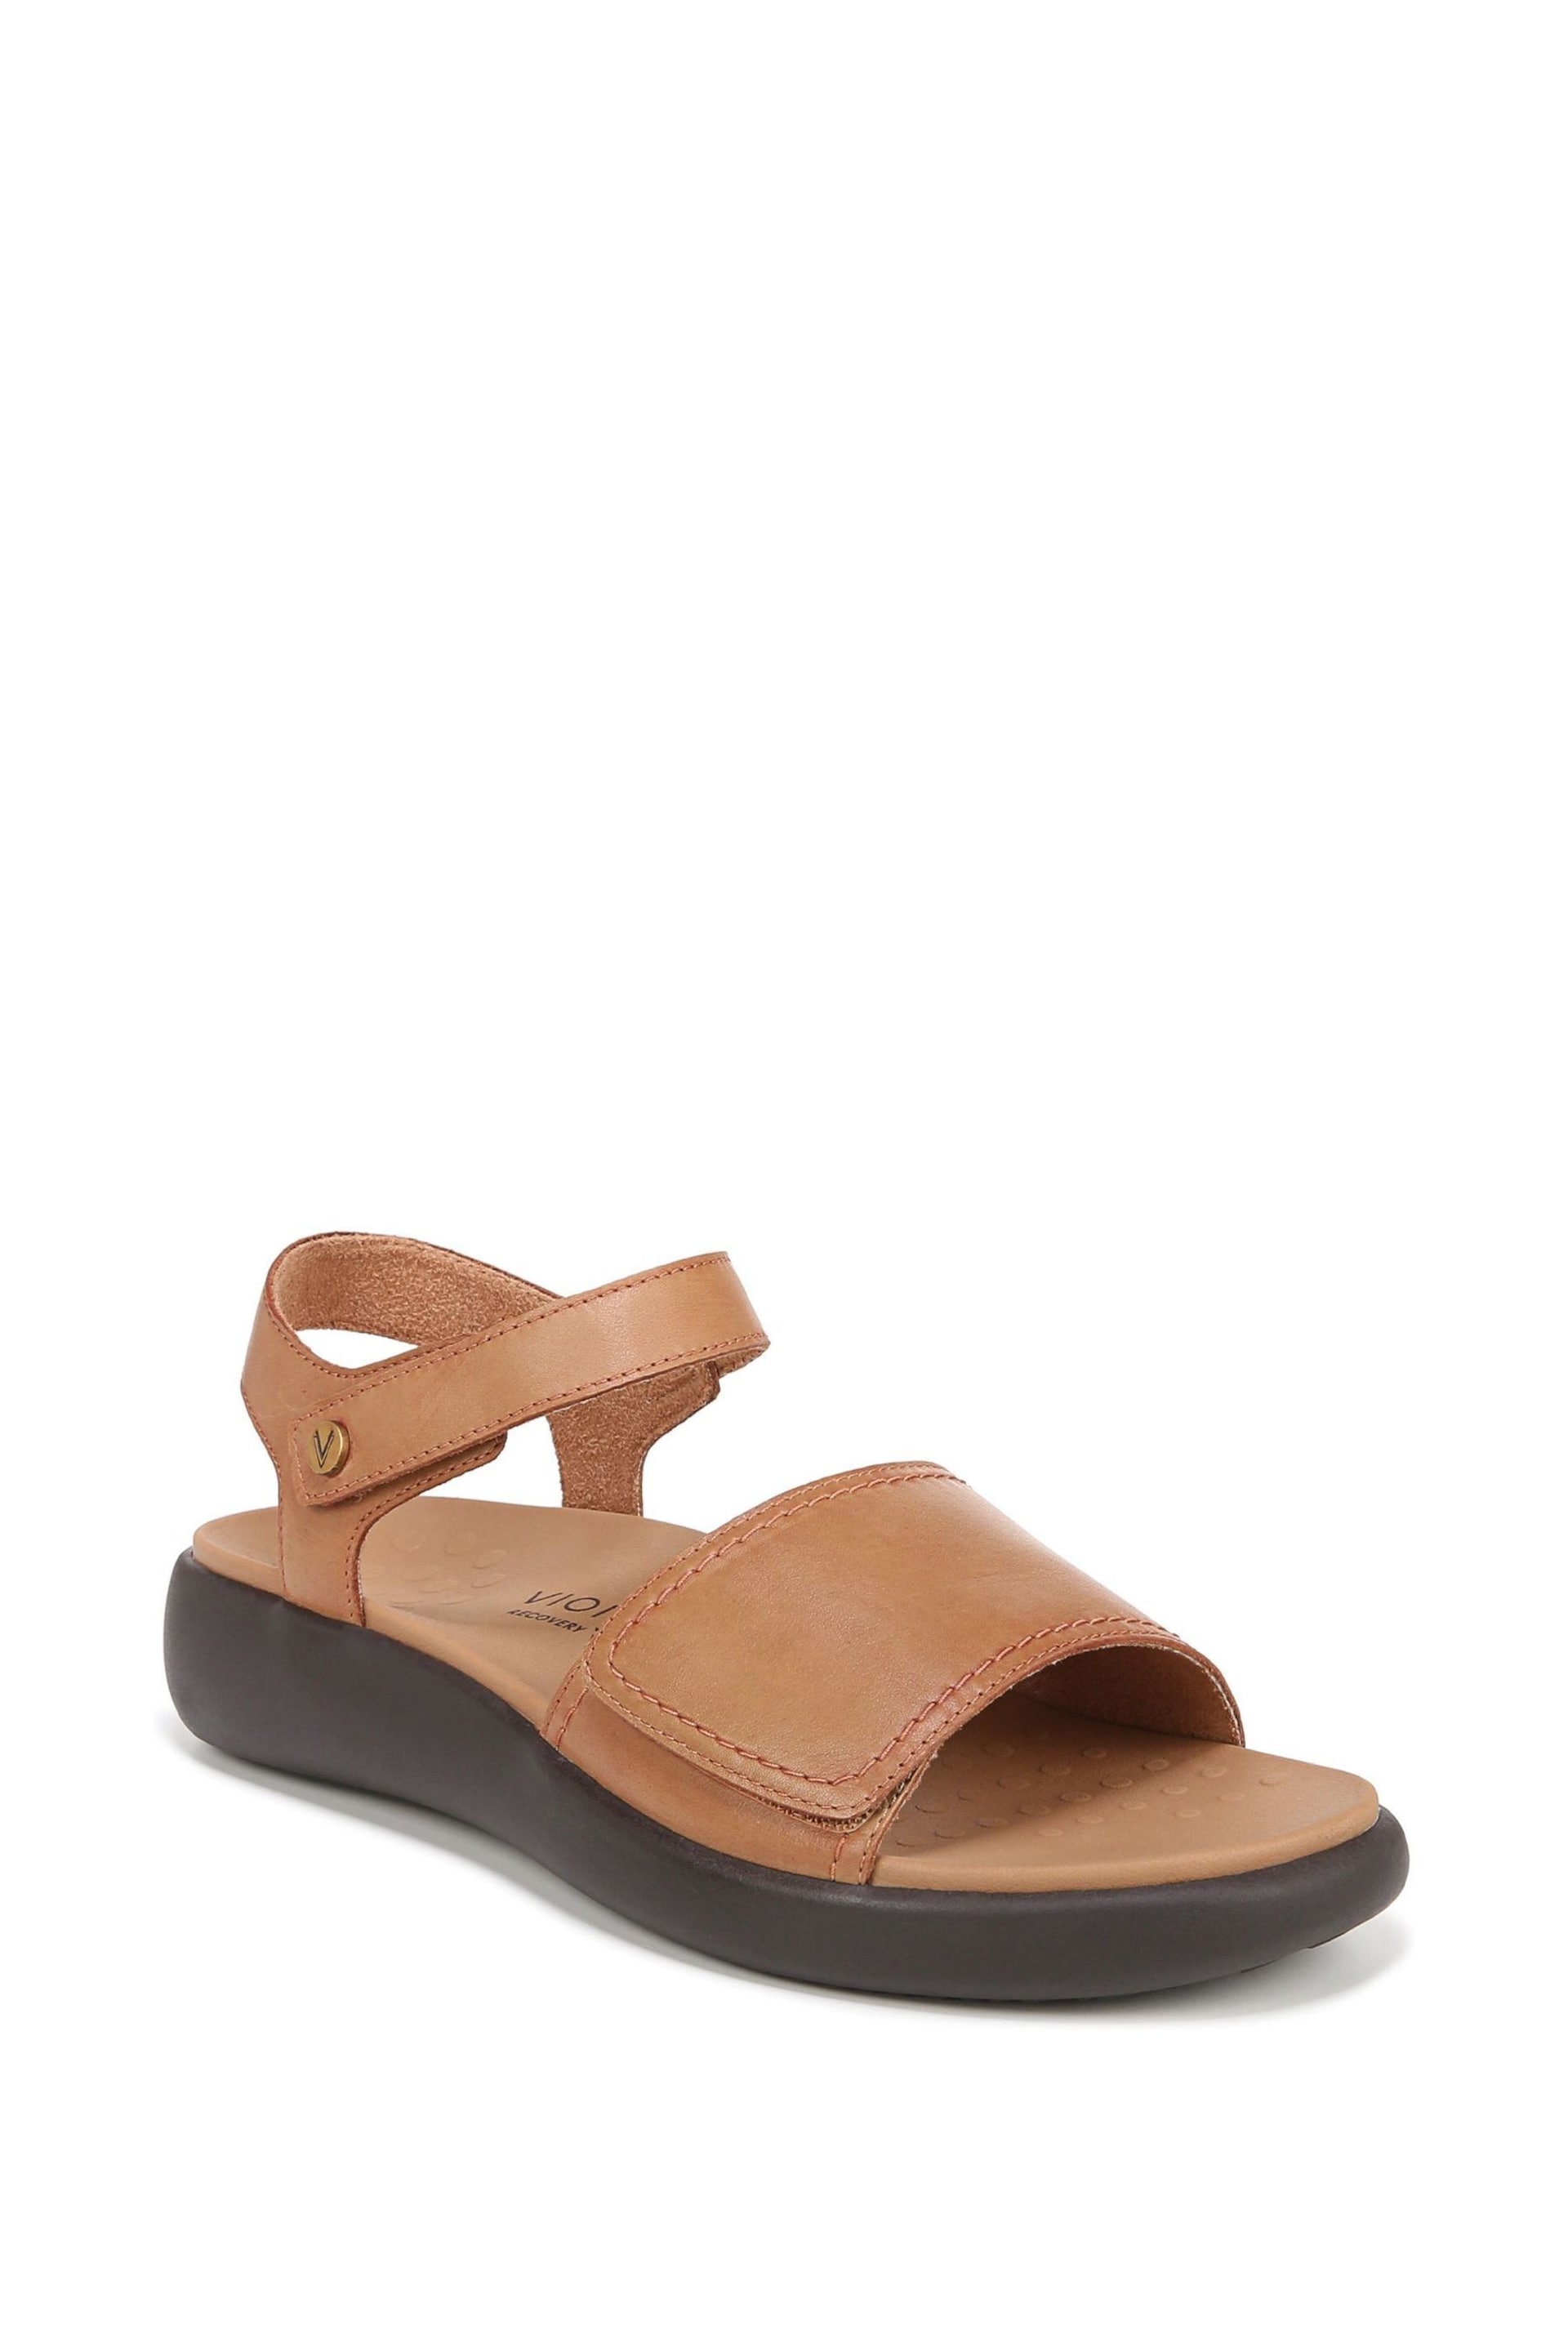 Vionic Awaken Wide Fit Ankle Strap Sandals - Image 3 of 7